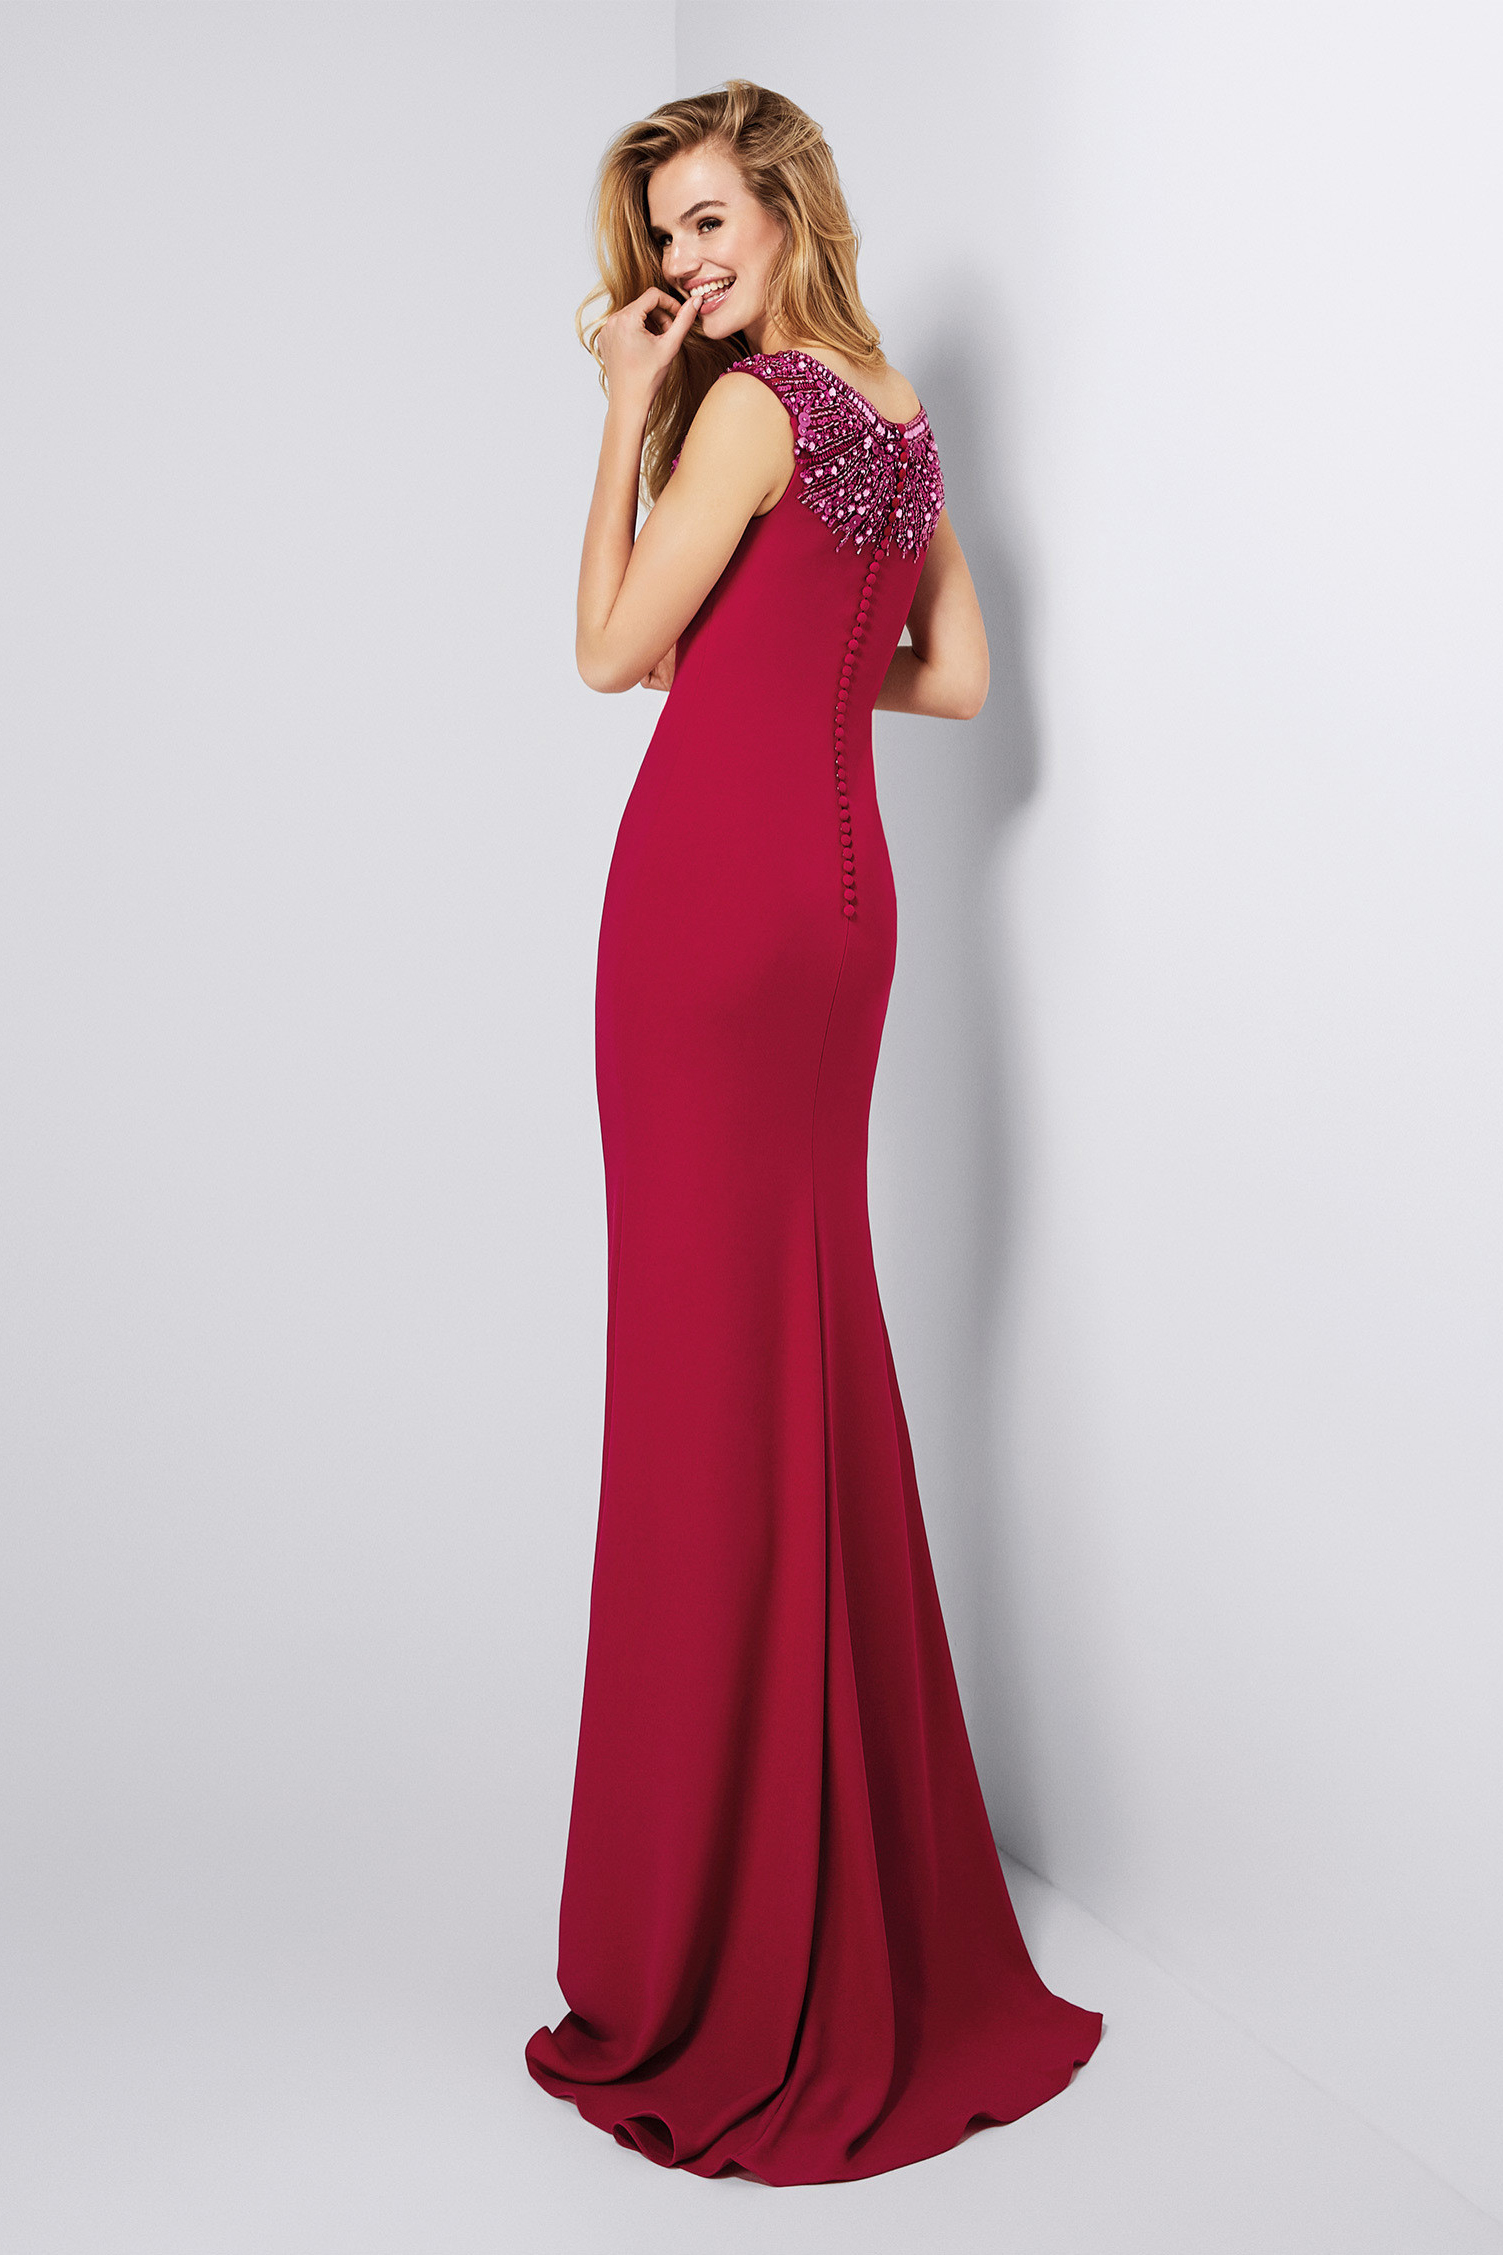 Sparkly Beaded Long Sheath Red Jersey Prom Dress with Cap Sleeves